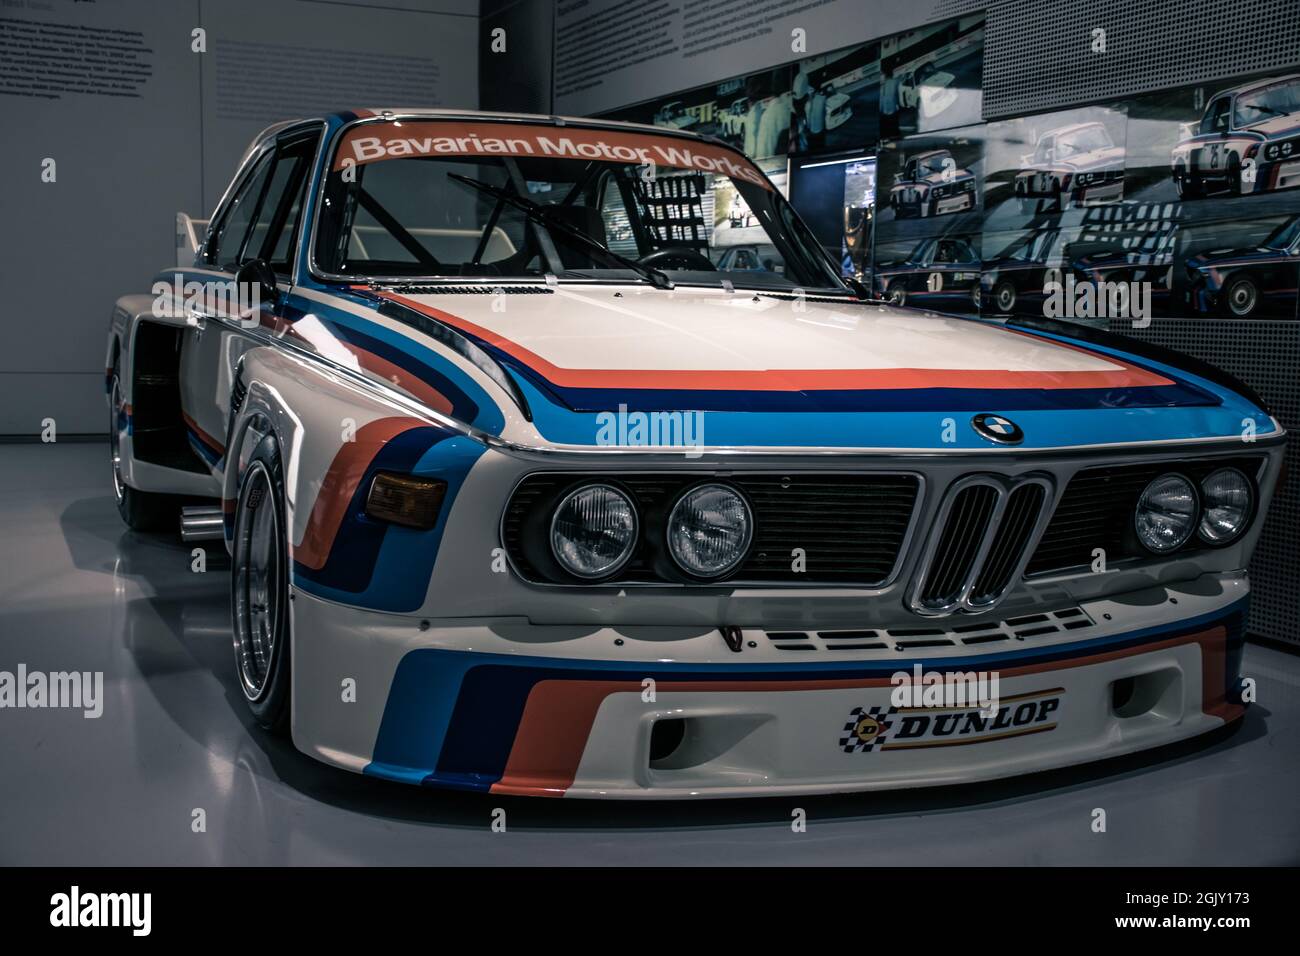 Munich/ Germany - May, 24 2019:BMW 3.0 CSL 1975 classic German touring race old 1970s car known as 'Batmobile' in BMW Museum/ BMW Welt Stock Photo